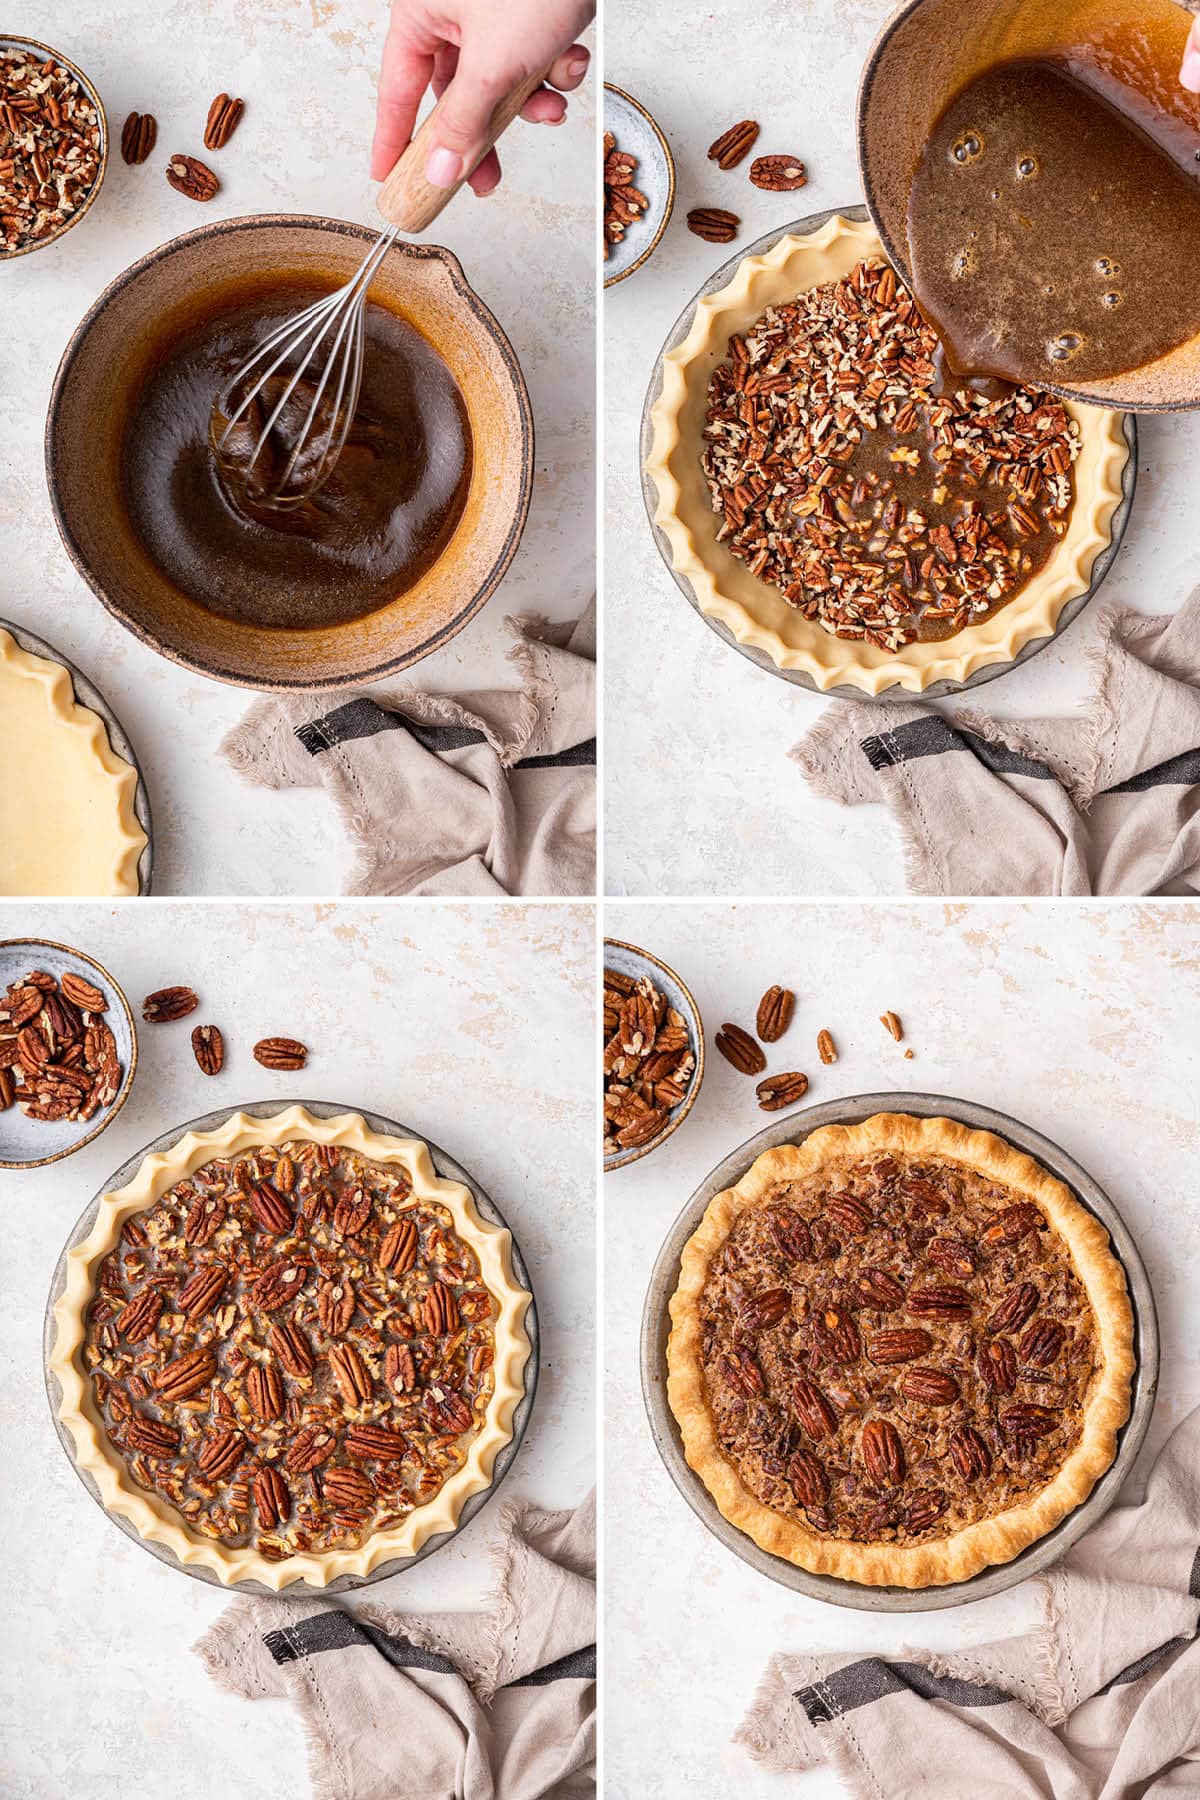 Four photos showing the steps to make Easy Pecan Pie: whisking egg and sugar mixture, pouring that into a pie crust filled with chopped pecans, adding more pecans on top and then baking.